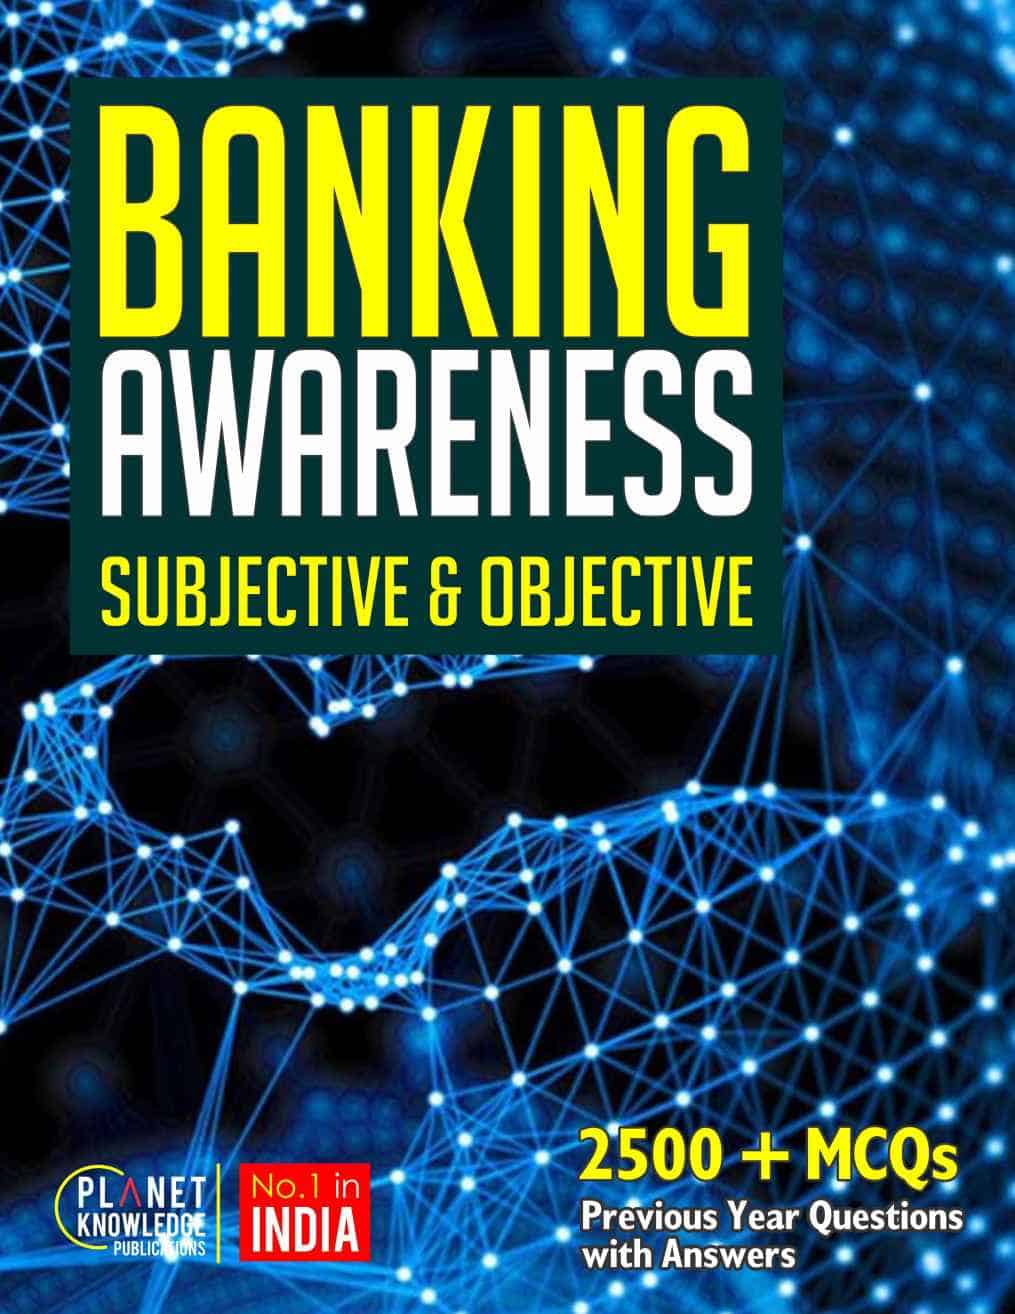 Banking Awareness Subjective & Objective - Planet Knowledge Editorial Board